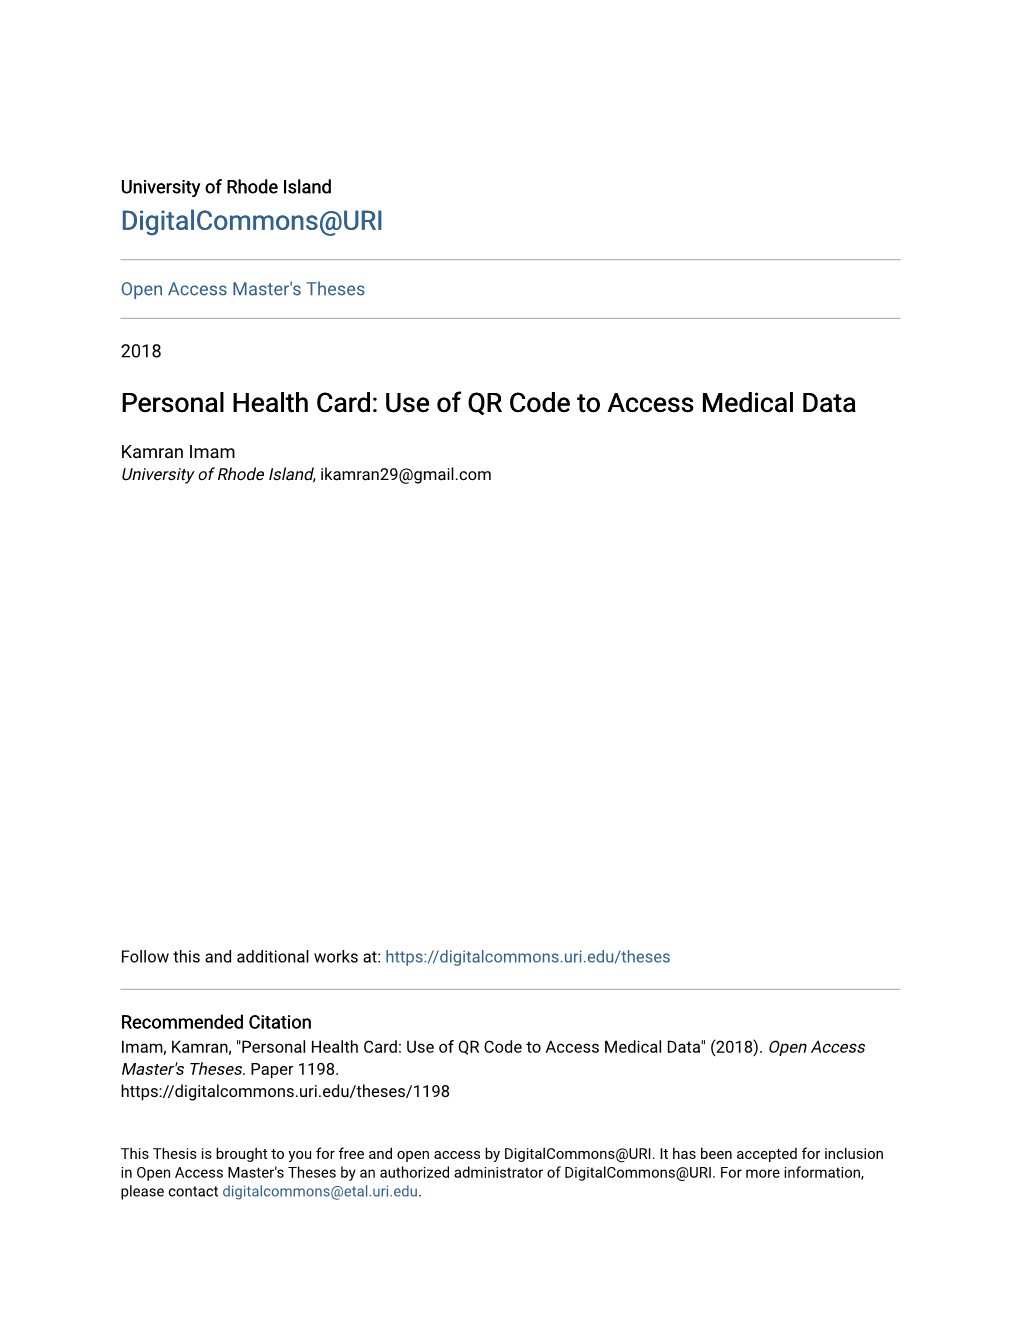 Use of QR Code to Access Medical Data